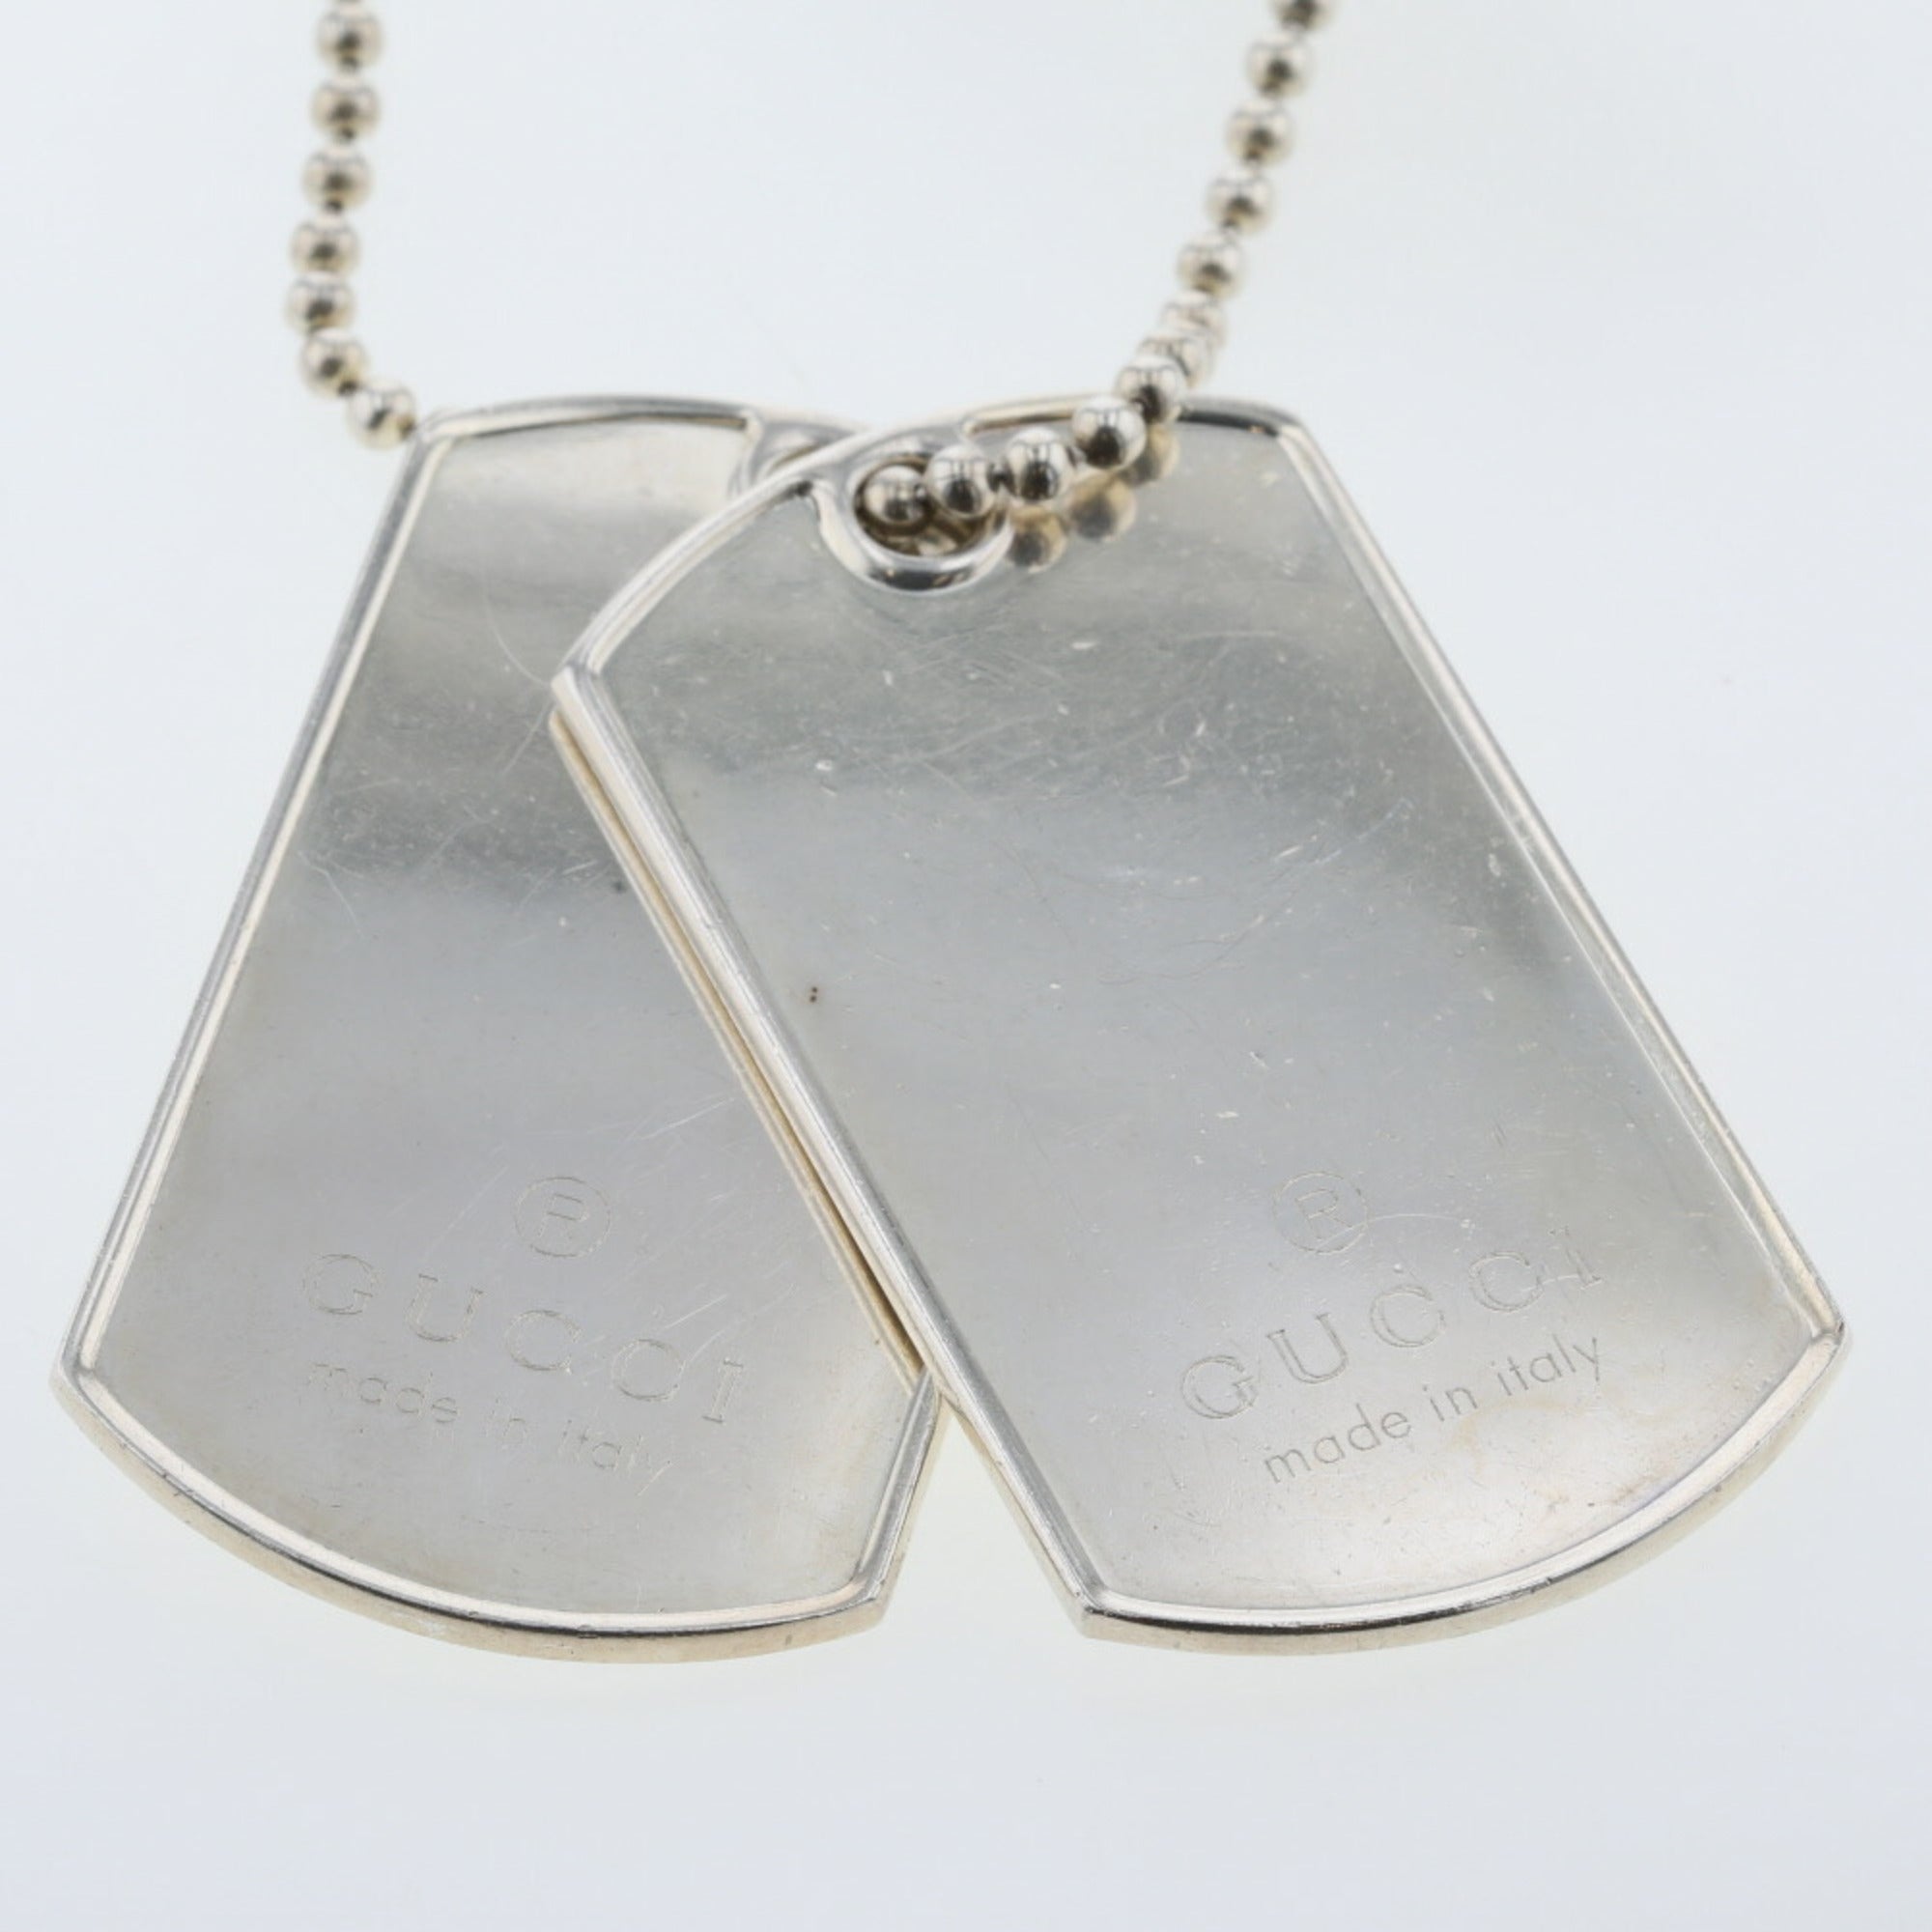 Gucci Dog Tag Pendant Necklace - Sterling Silver Pendant Necklace, Necklaces  - GUC1456097 | The RealReal